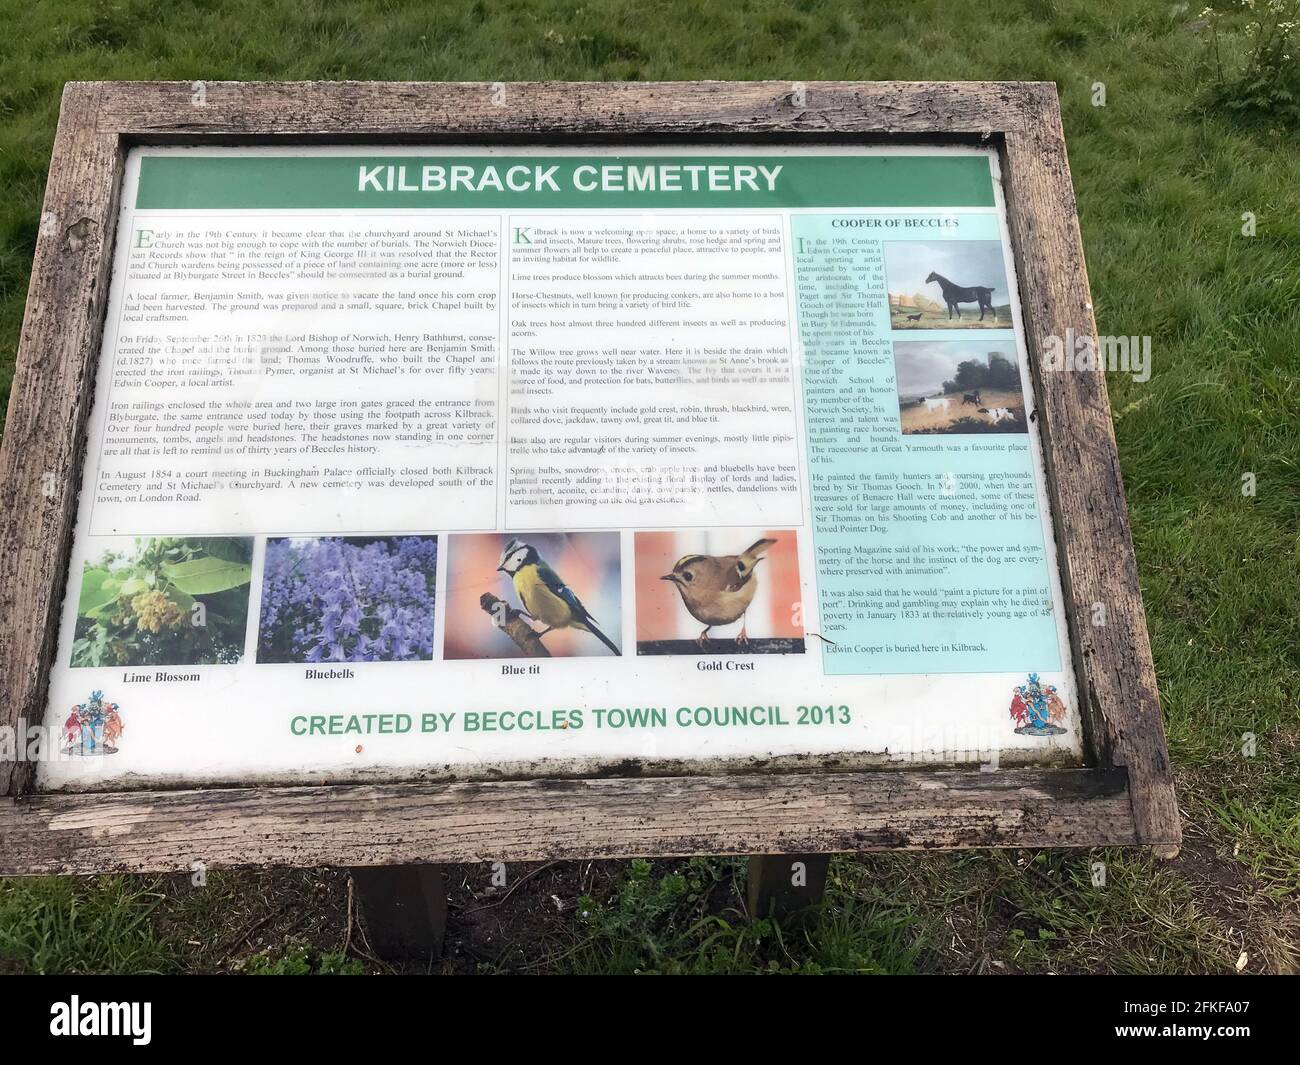 commemoration notice for nature area kilbrack beccles suffolk england about nature area and artist edwin cooper Stock Photo